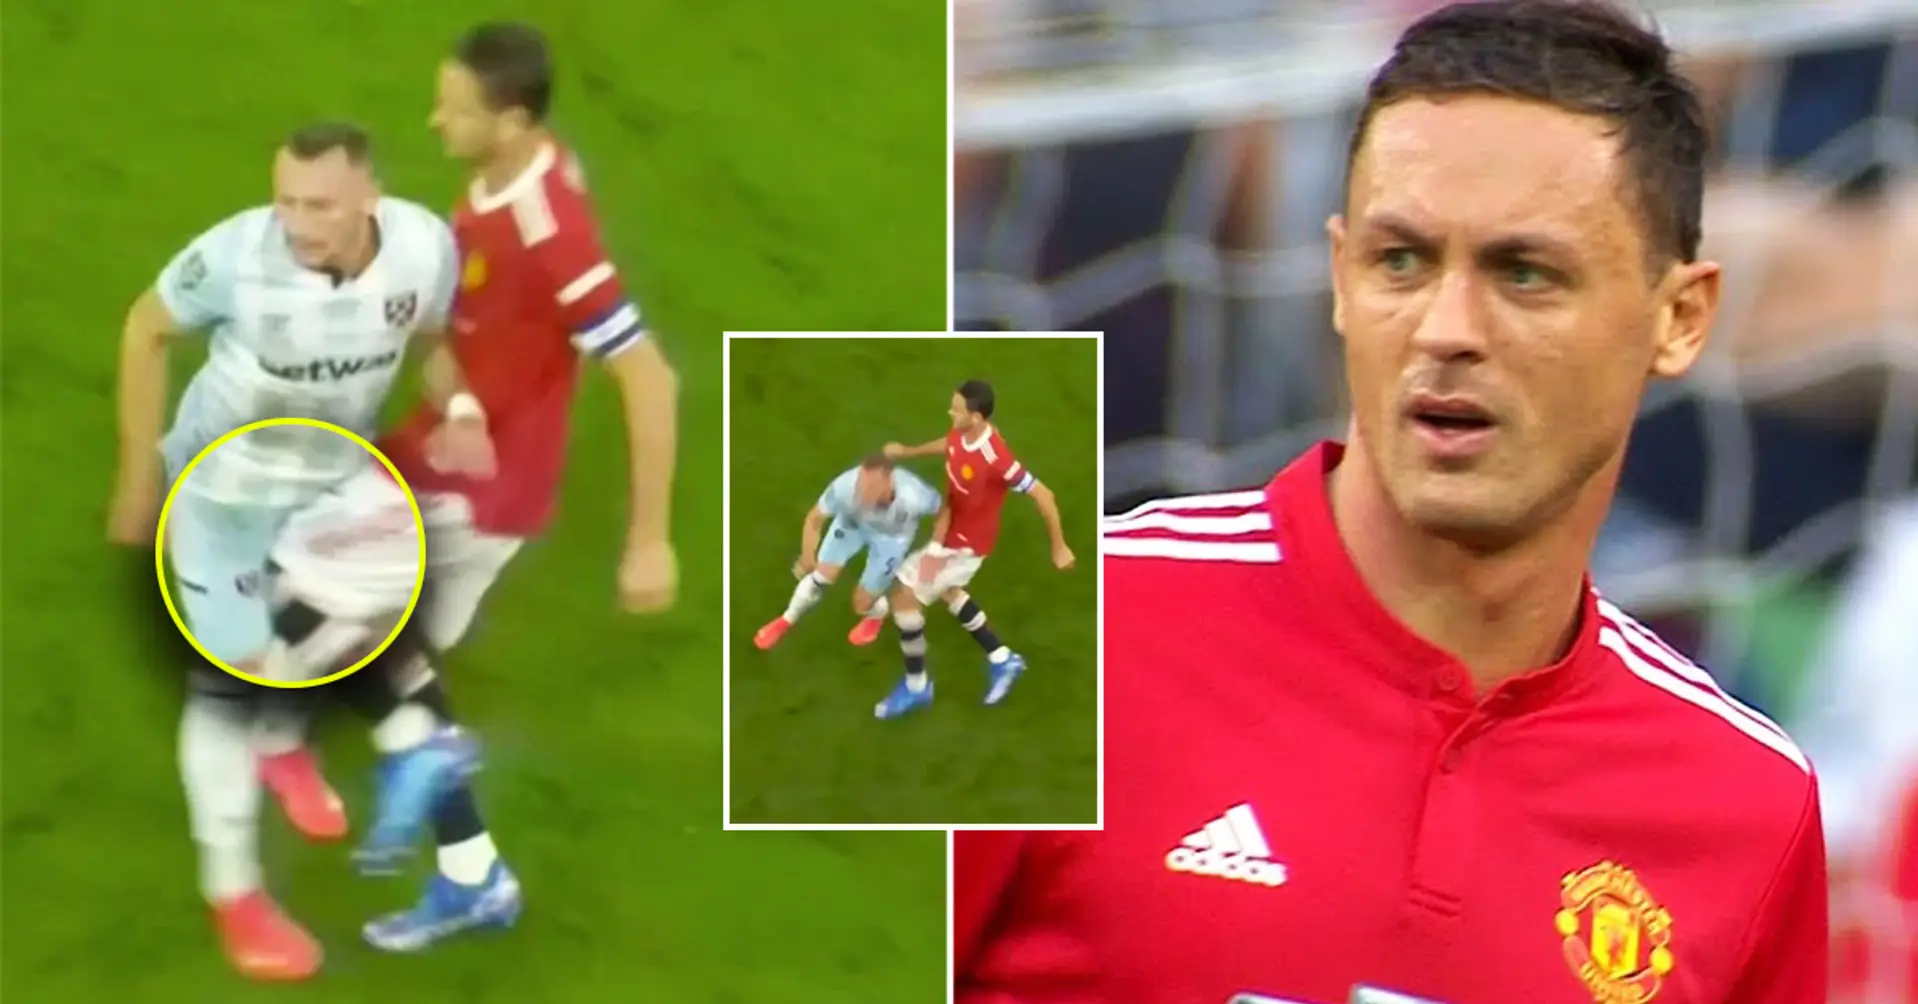 Caught on camera: Nemanja Matic hits opponent in the b* * * – did he do it on purpose?